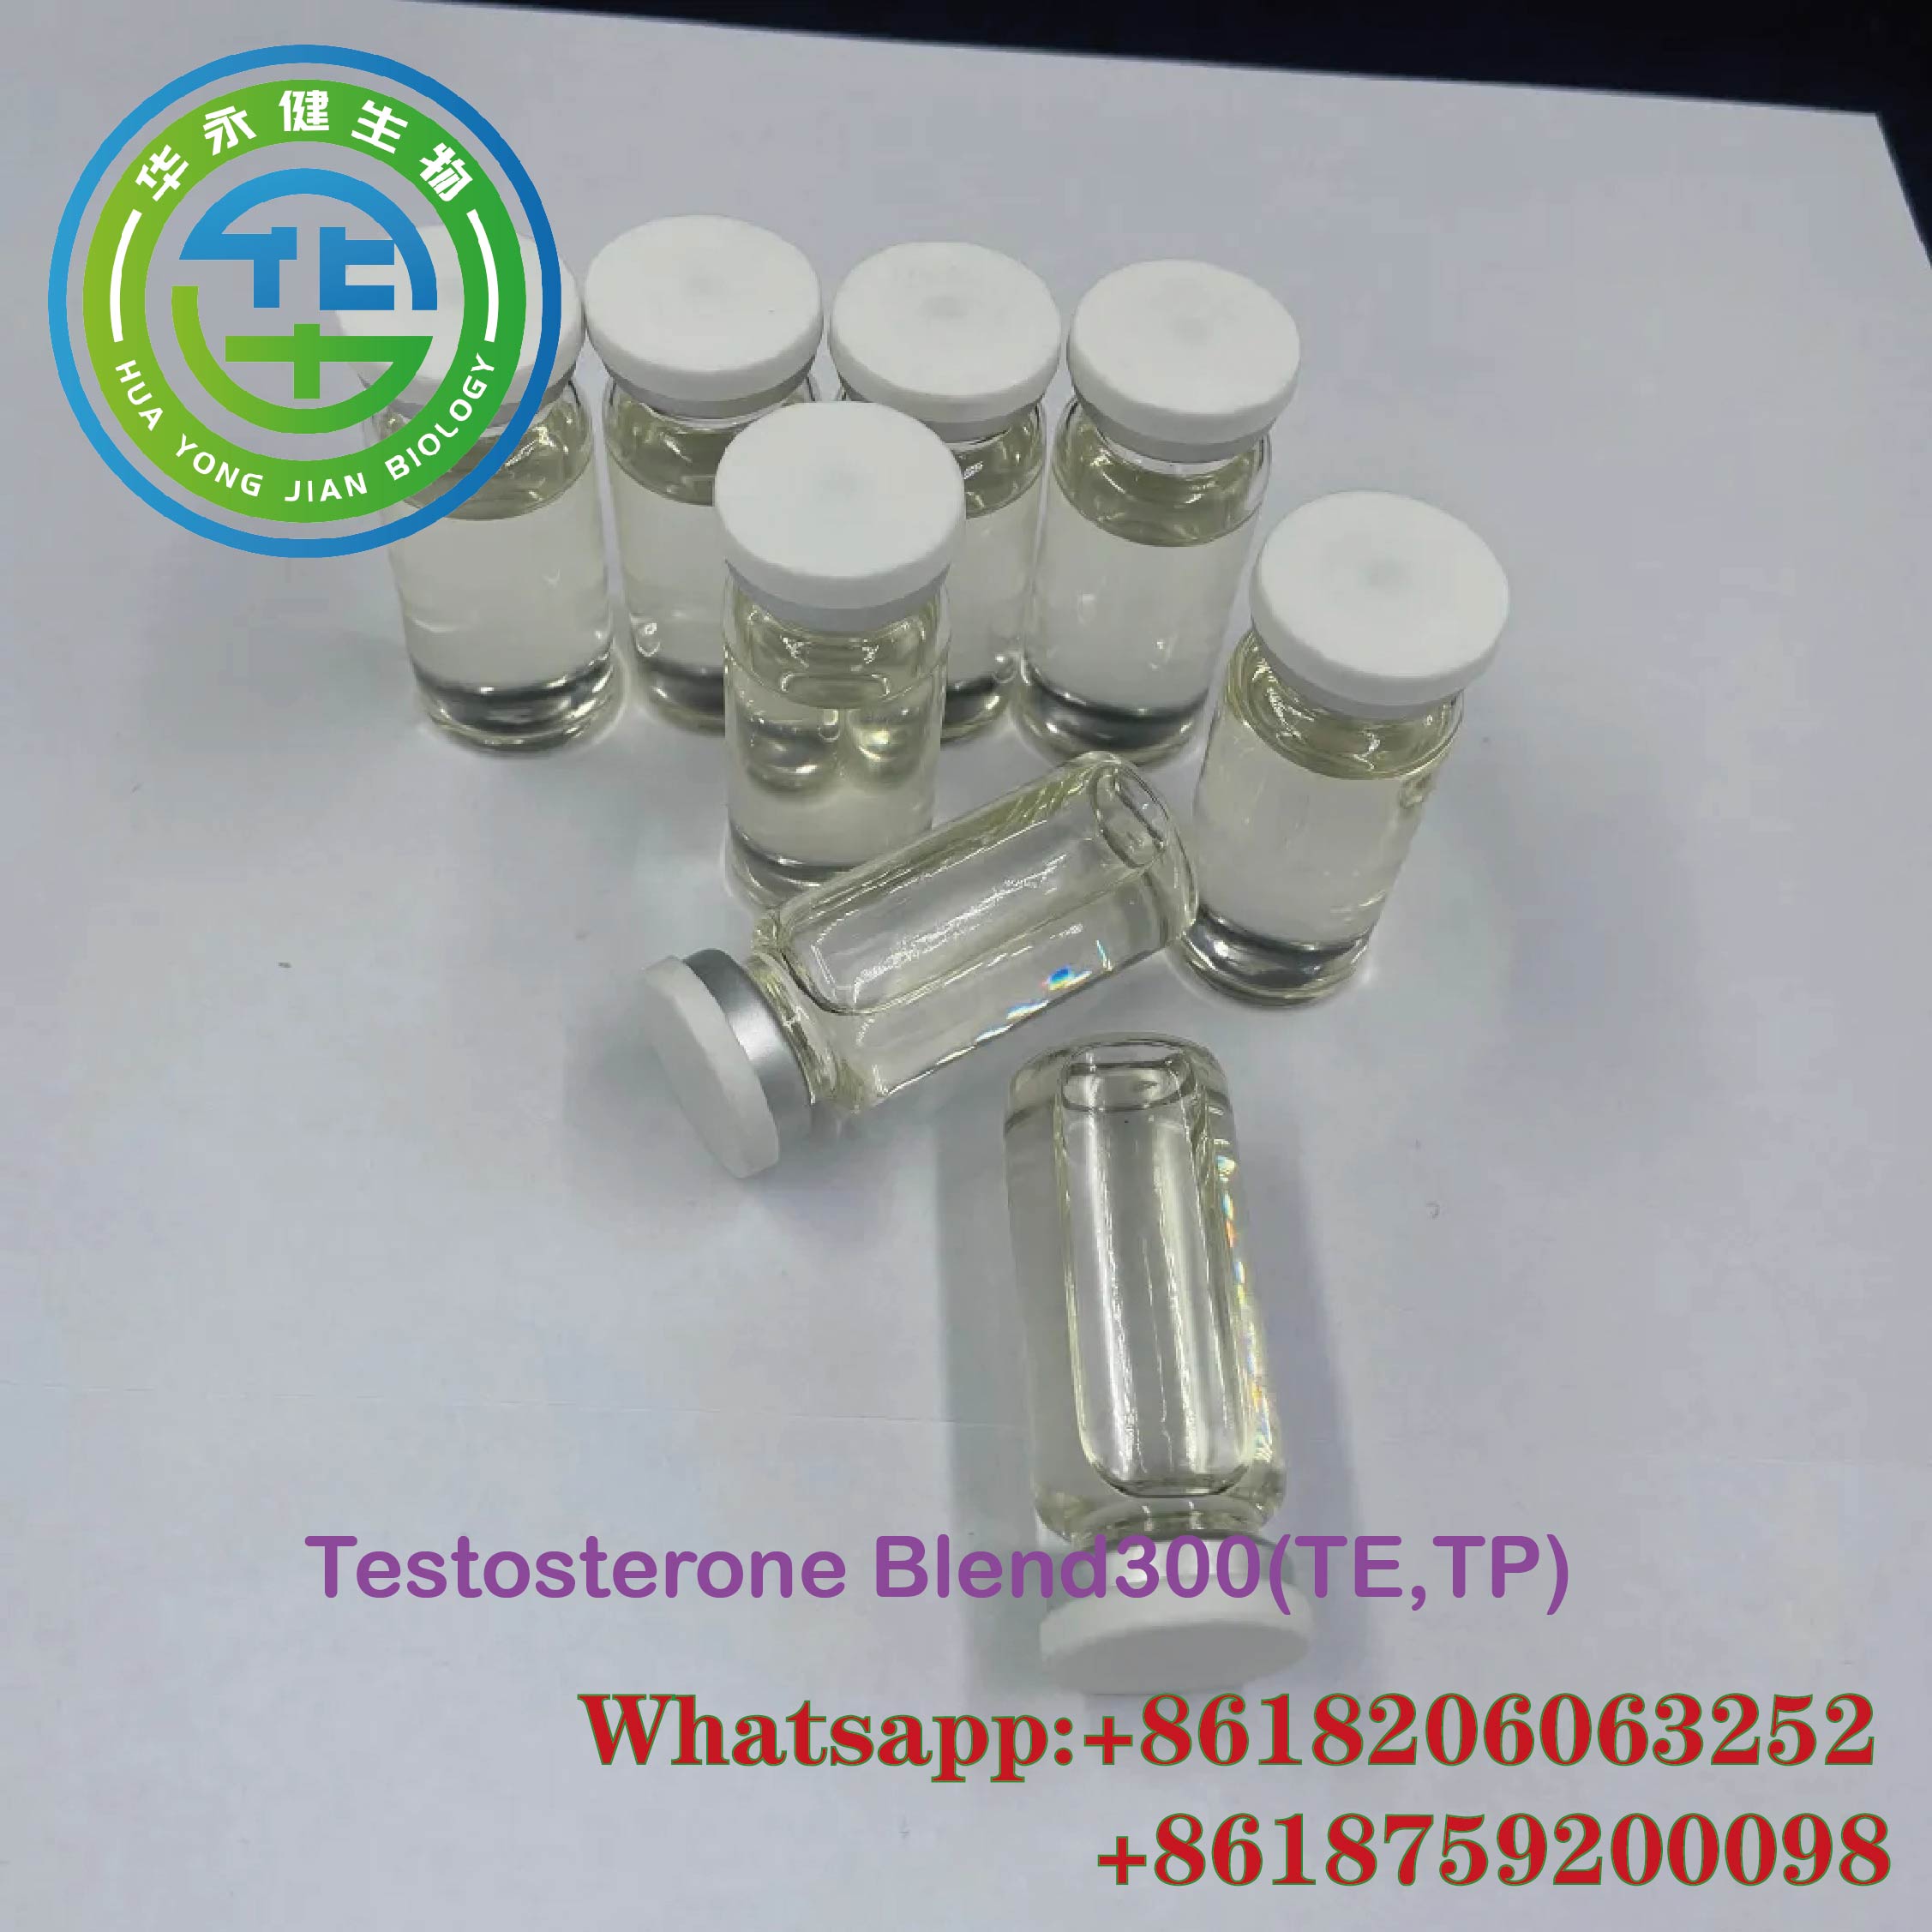 Muscle Gain Oil 10ml Testosterone Blend Injectable Bodybuilding Oil 300mg/ml Liquid